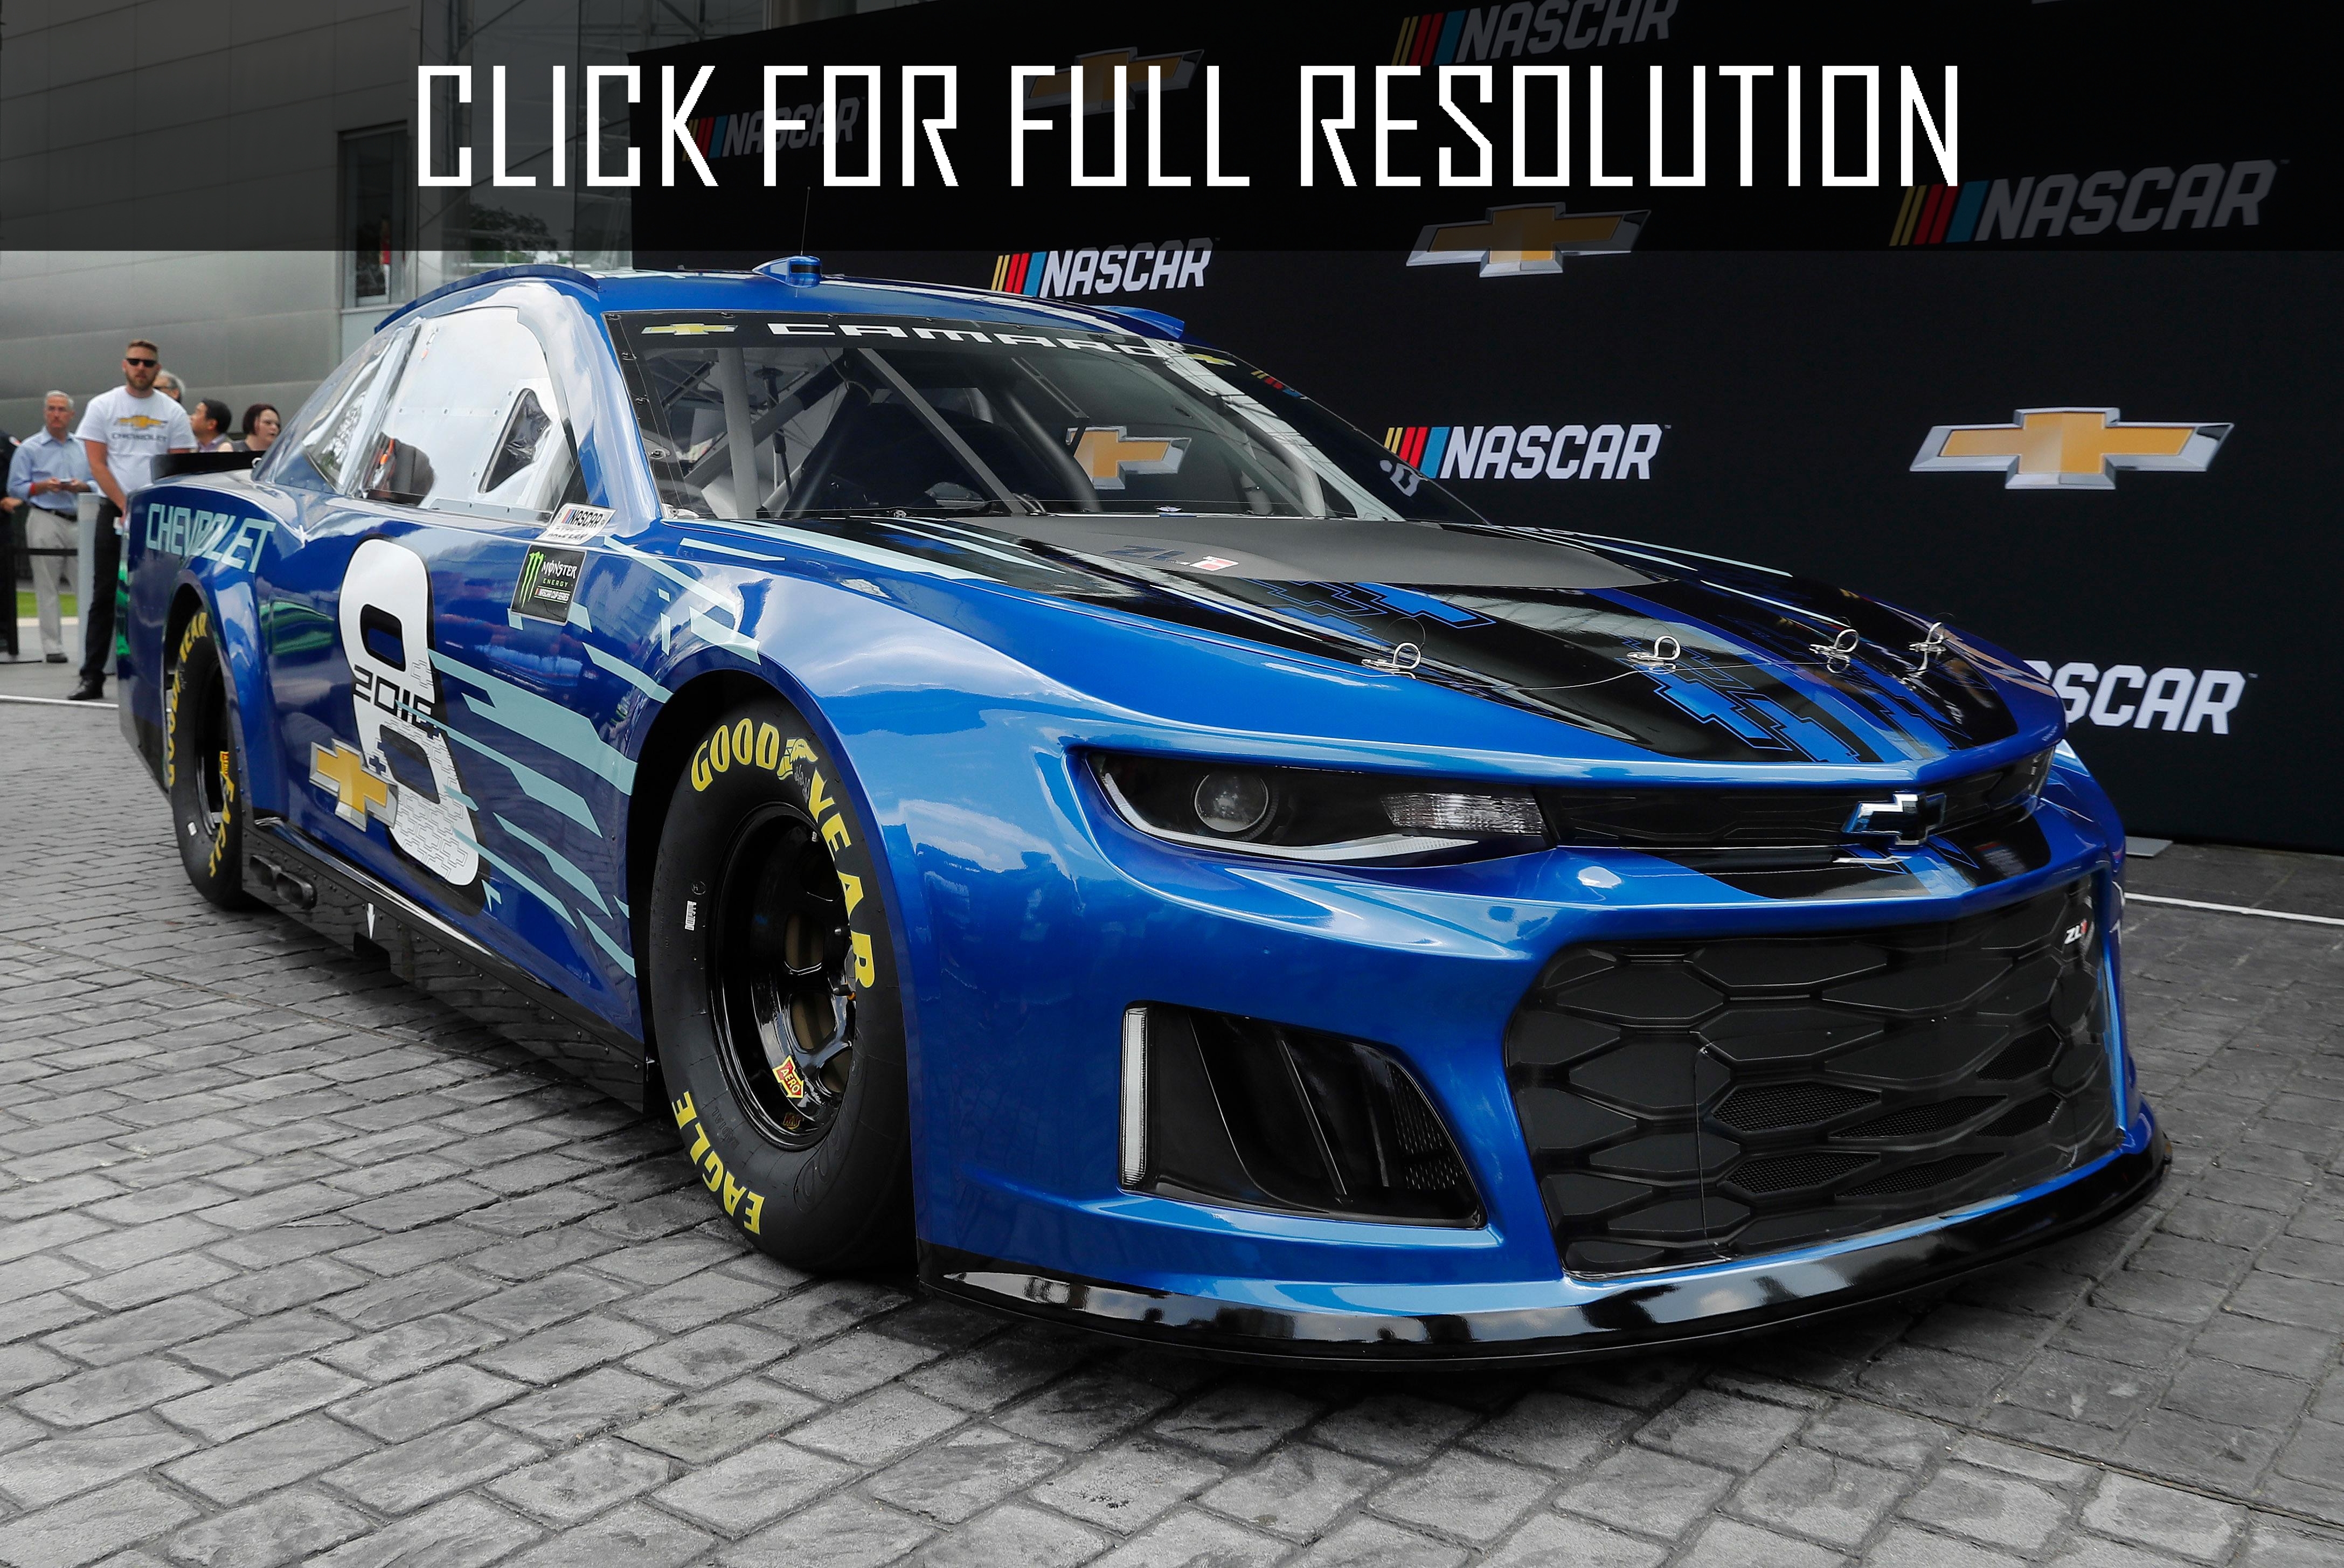 Chevrolet Camaro Nascar amazing photo gallery, some information and